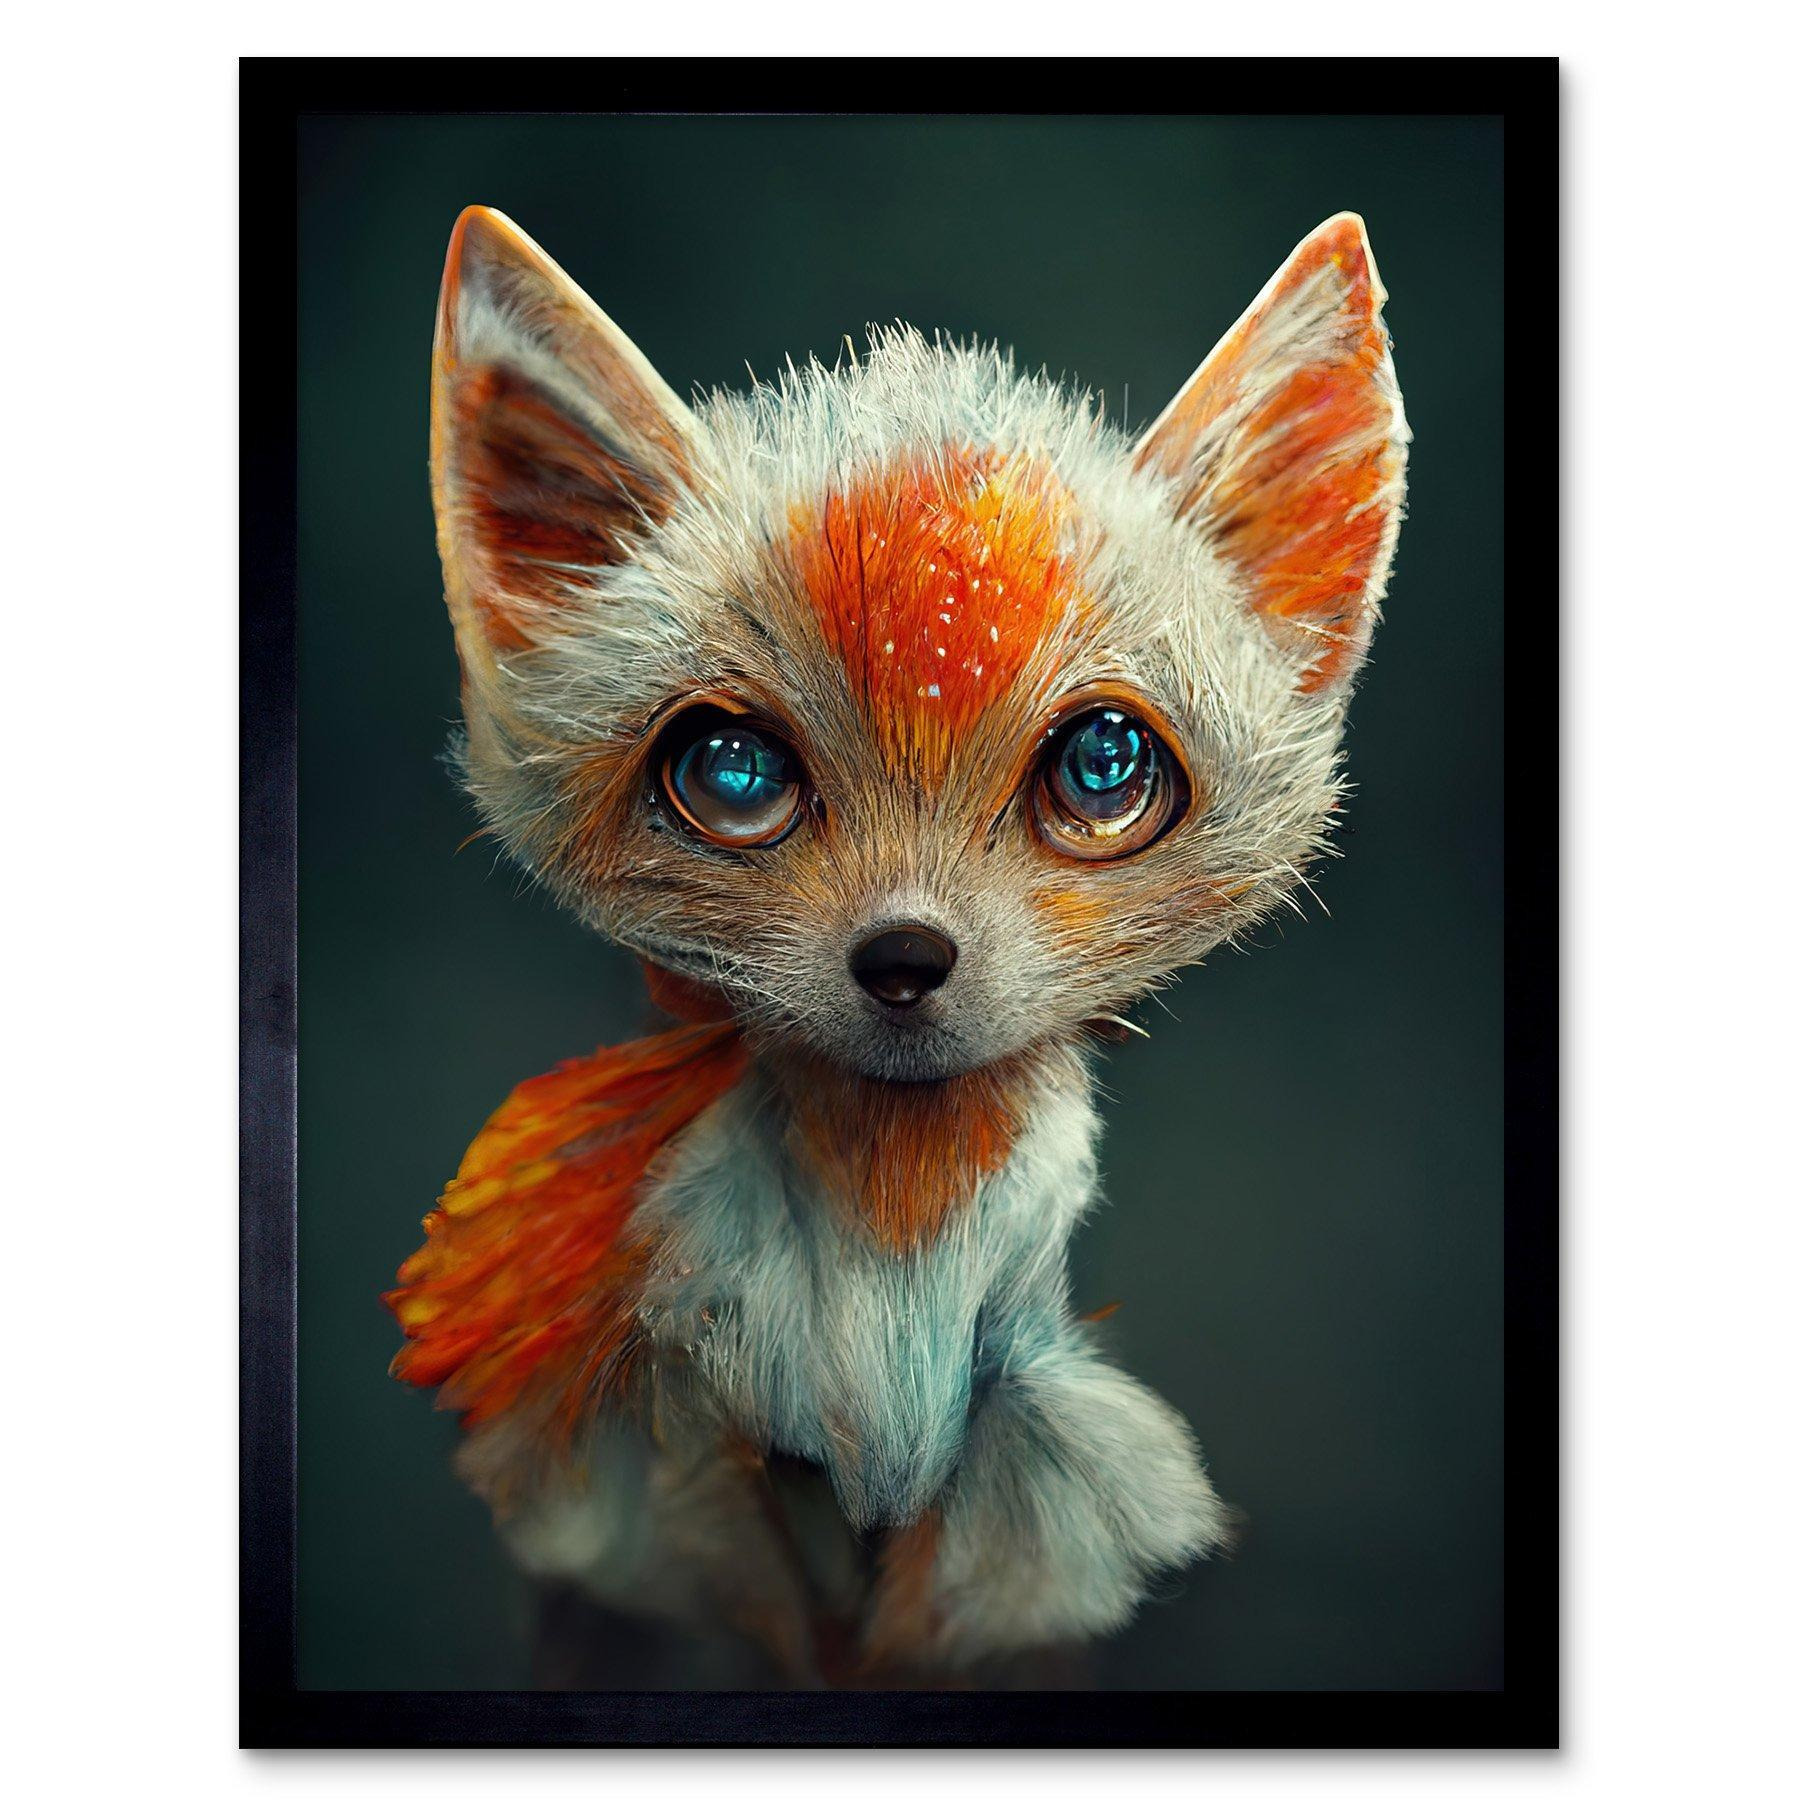 The Blue Eyed Fox Cute Portrait Photo Painting Art Print Framed Poster Wall Decor 12x16 inch - image 1